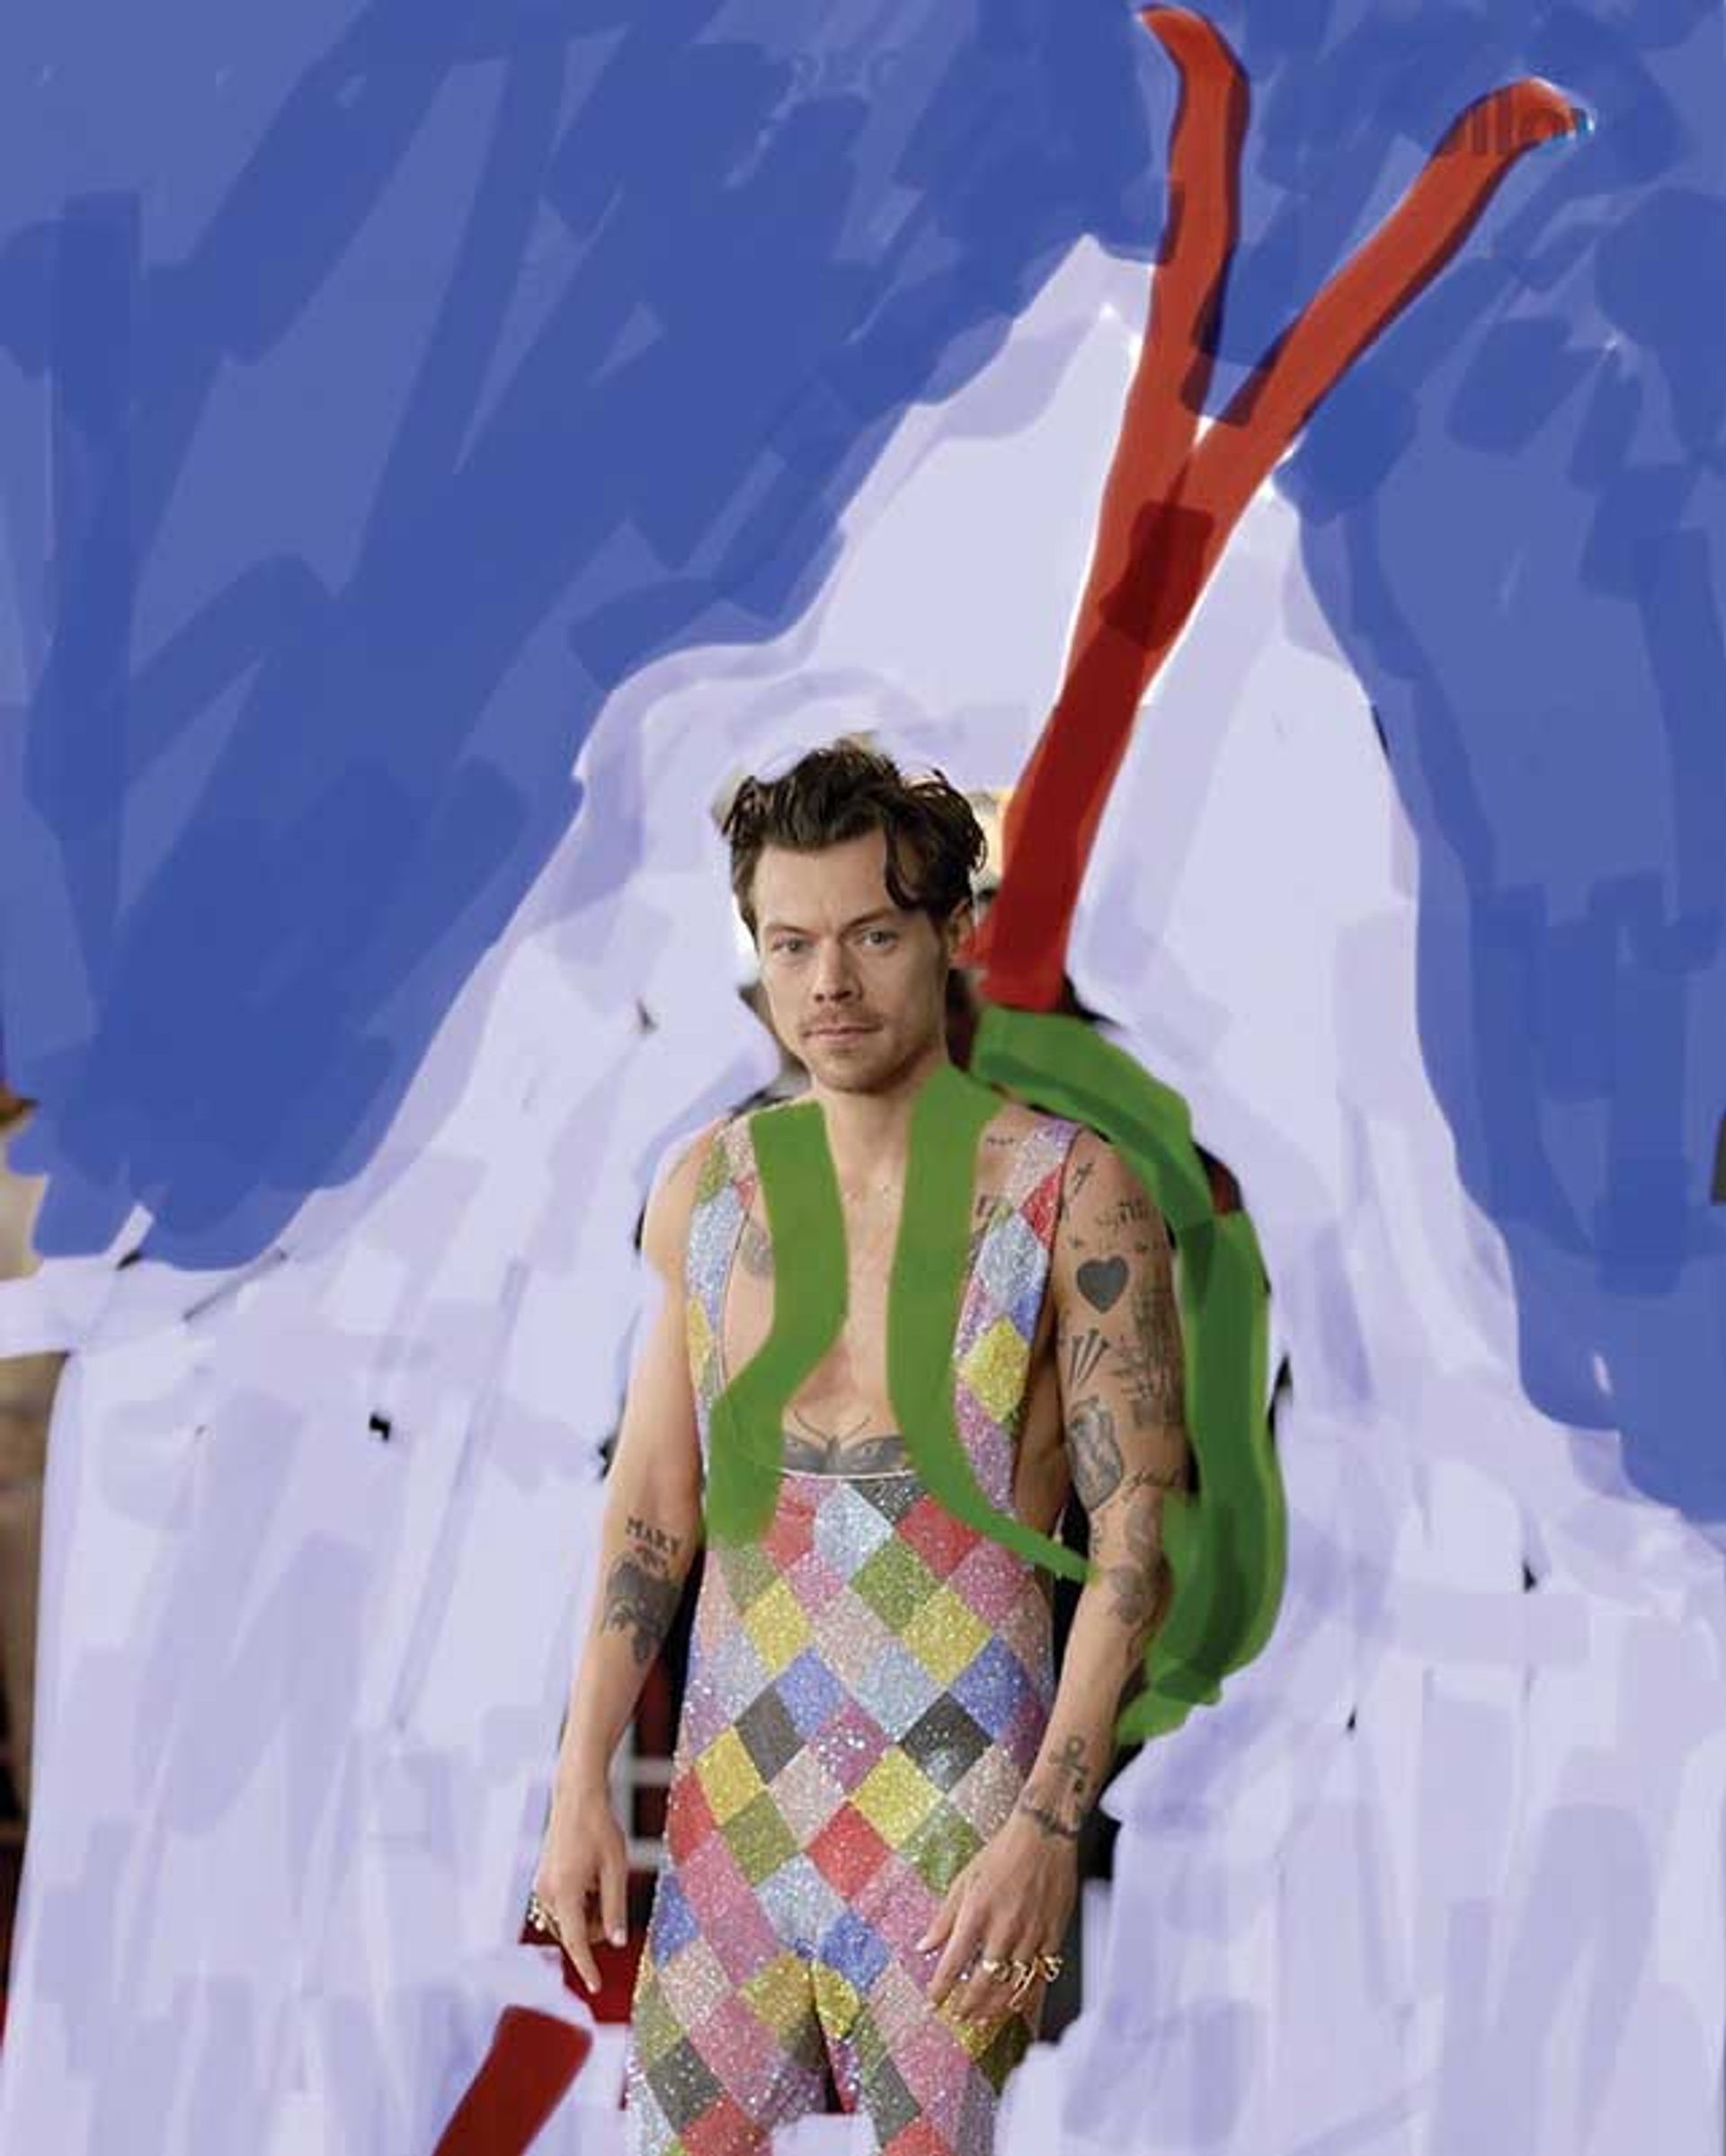 Harlequin skier: Peter Doig’s Instagram homage to pop star Harry Styles is a pastiche of his painting Alpinist (2019-22)

@peterdoig



